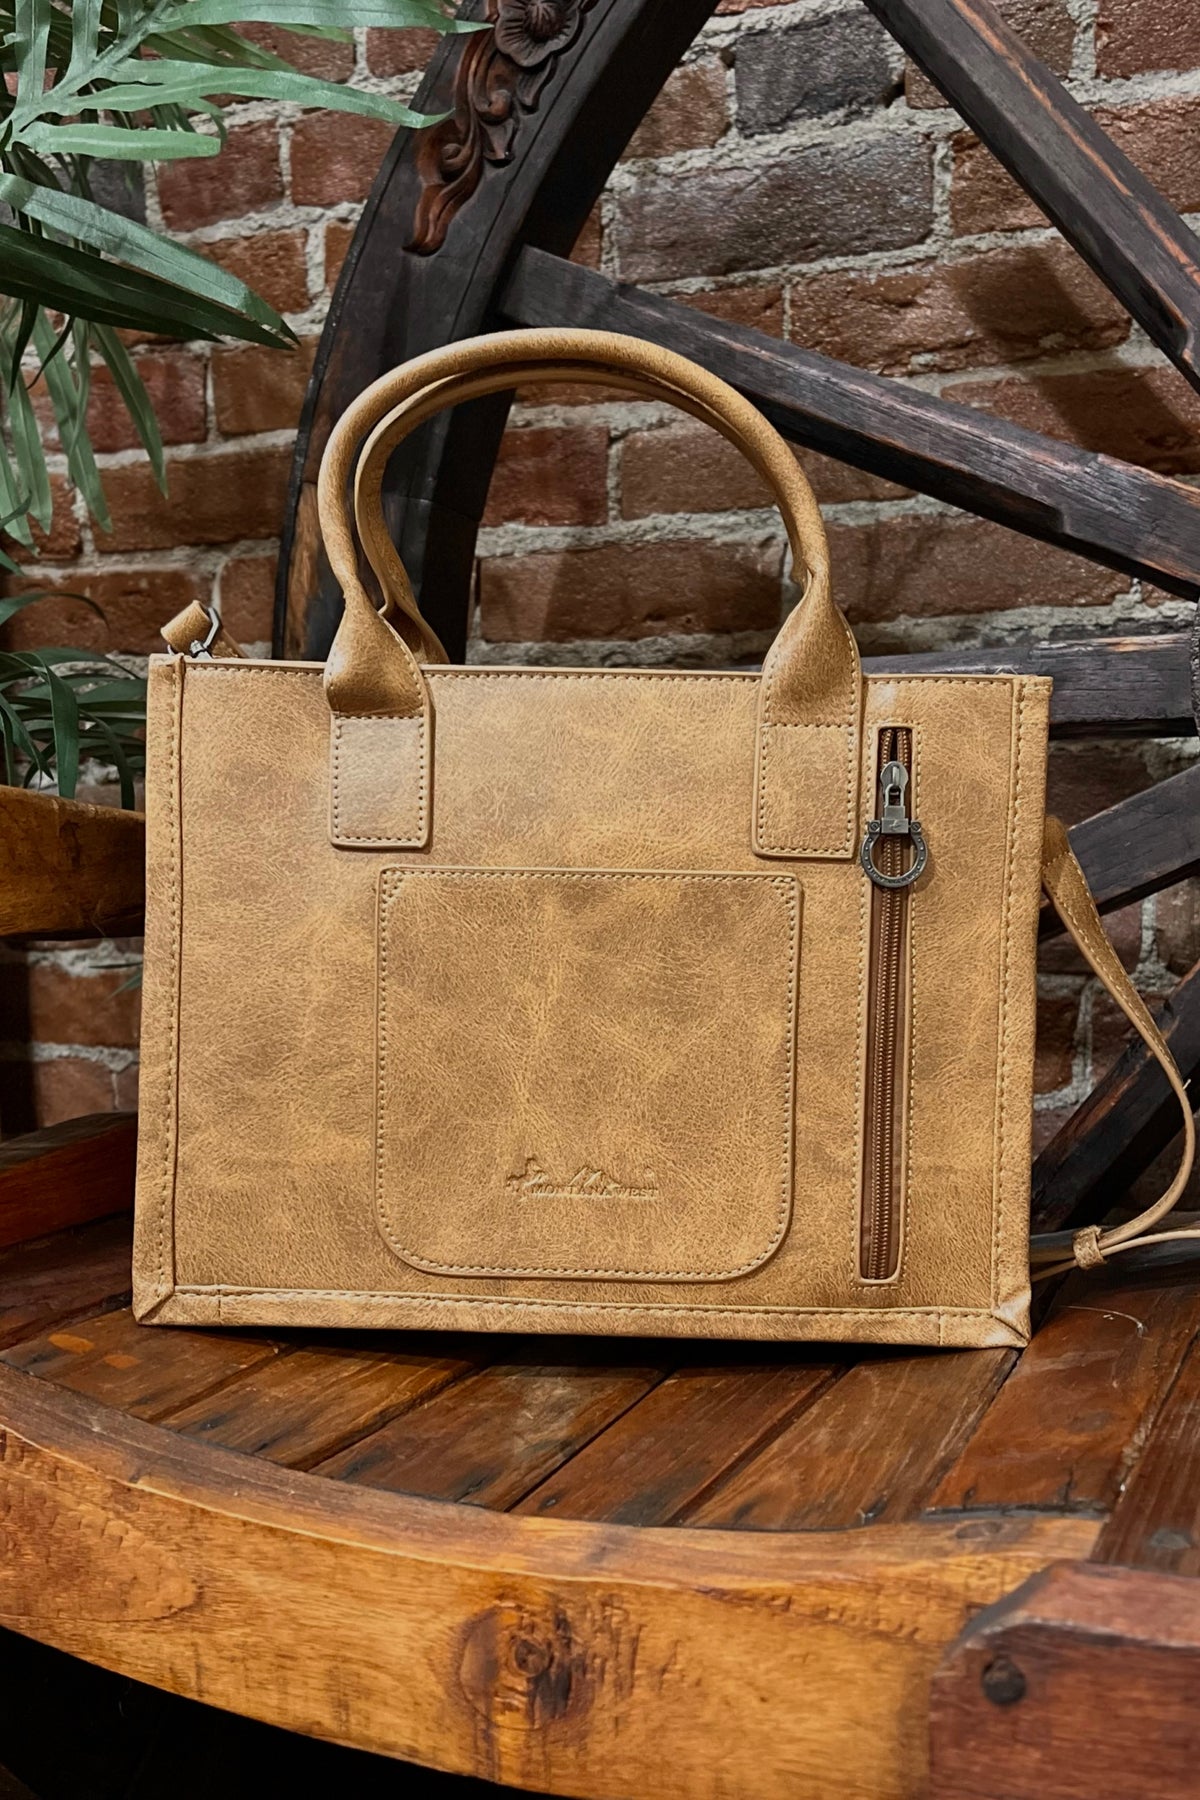 Montana West Whipstitch Concealed Carry Crossbody Tote w/Matching Bi-Fold Wallet-Handbags & Accessories-Montana West-Gallop 'n Glitz- Women's Western Wear Boutique, Located in Grants Pass, Oregon